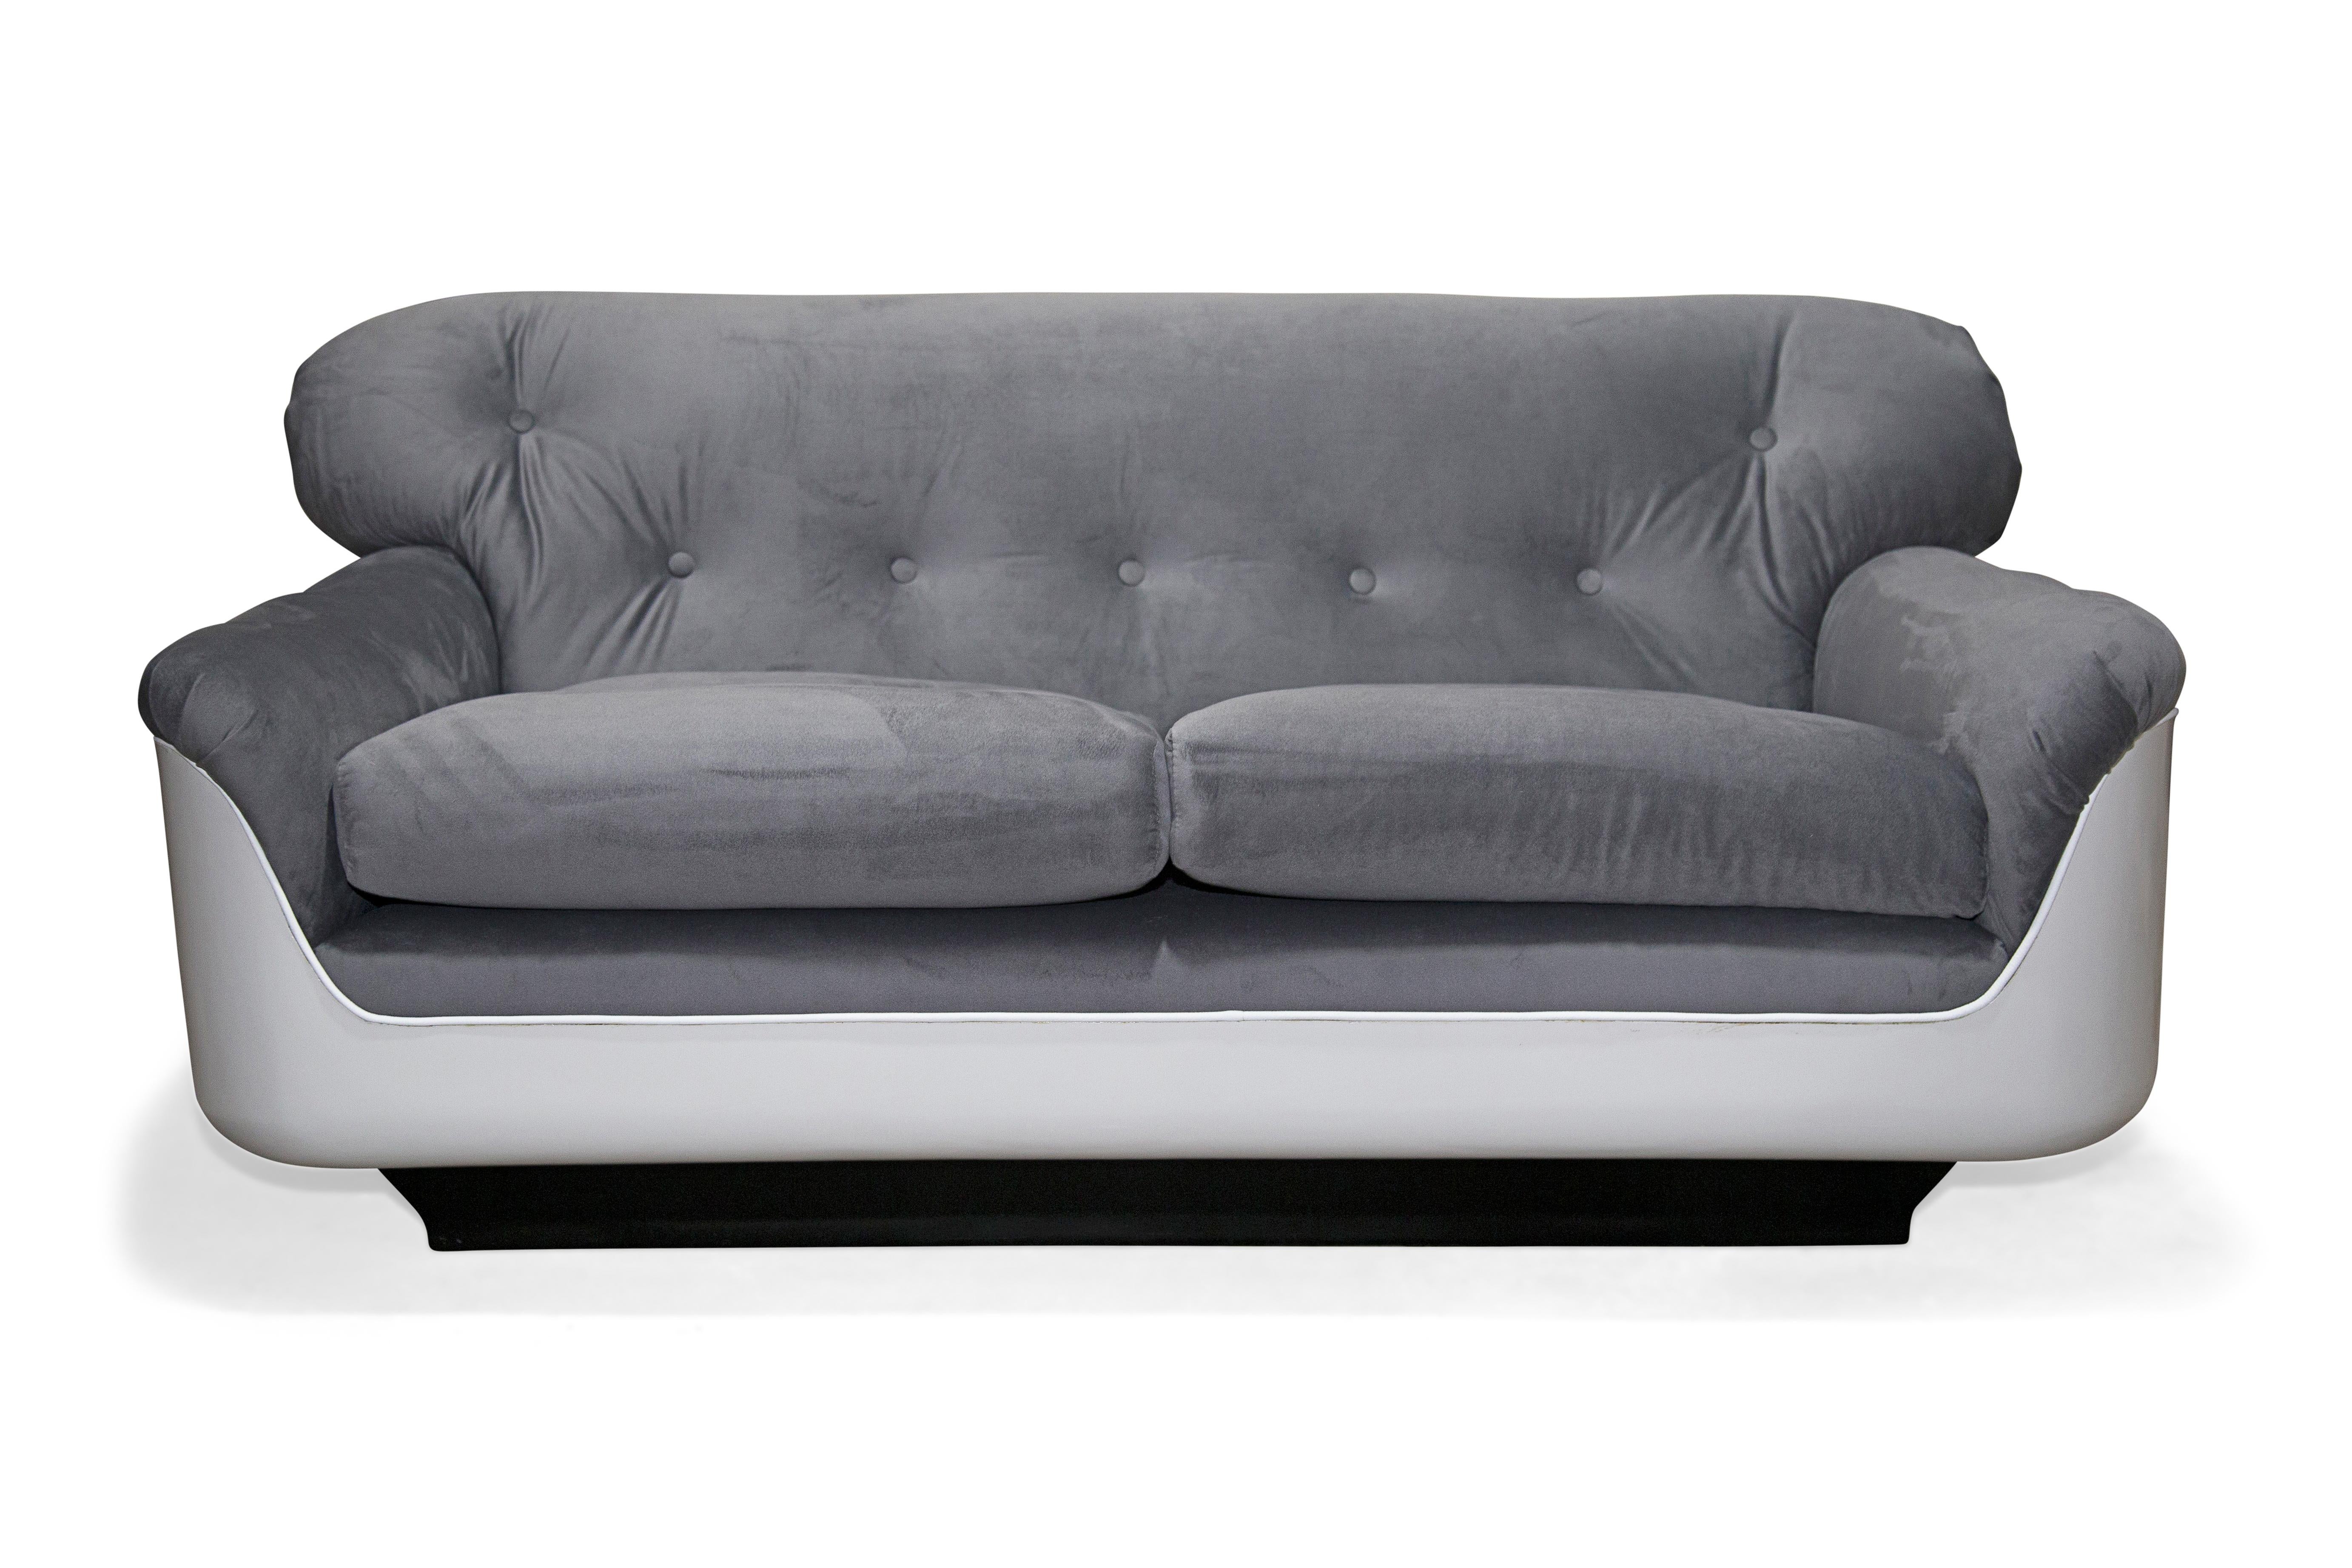 Available now, the VIP sofa was conceived to attend Brazil’s growing market of office furniture in the seventies decade. The sofa fits two comfortably and consists of a fiberglass structure with smooth gray velvet.

Not only beautiful and well